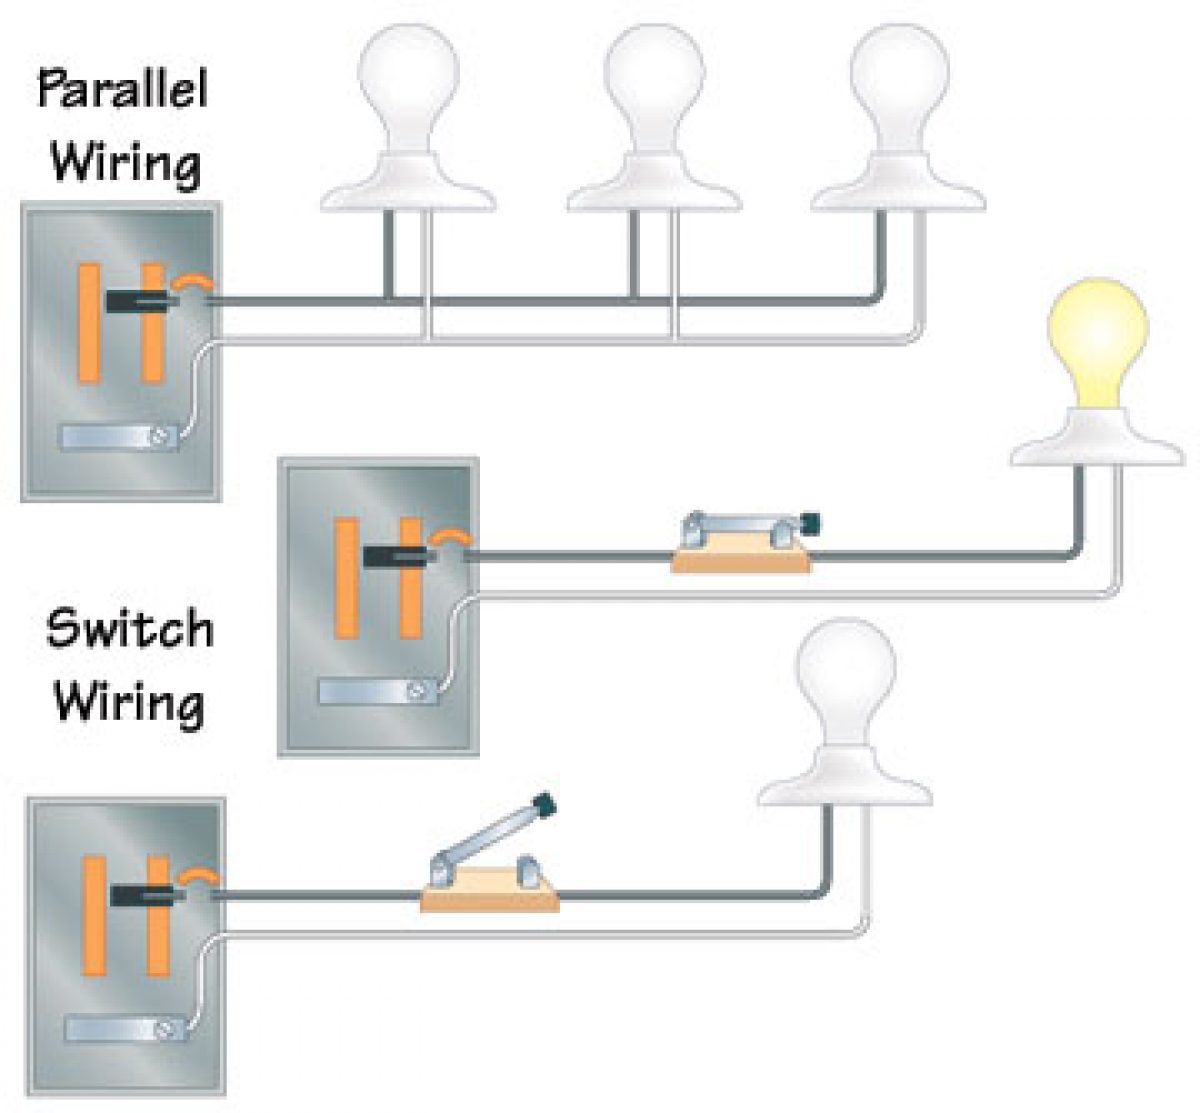 Types Of Electrical Wiring, How Many Types Of Wiring Diagrams Are There